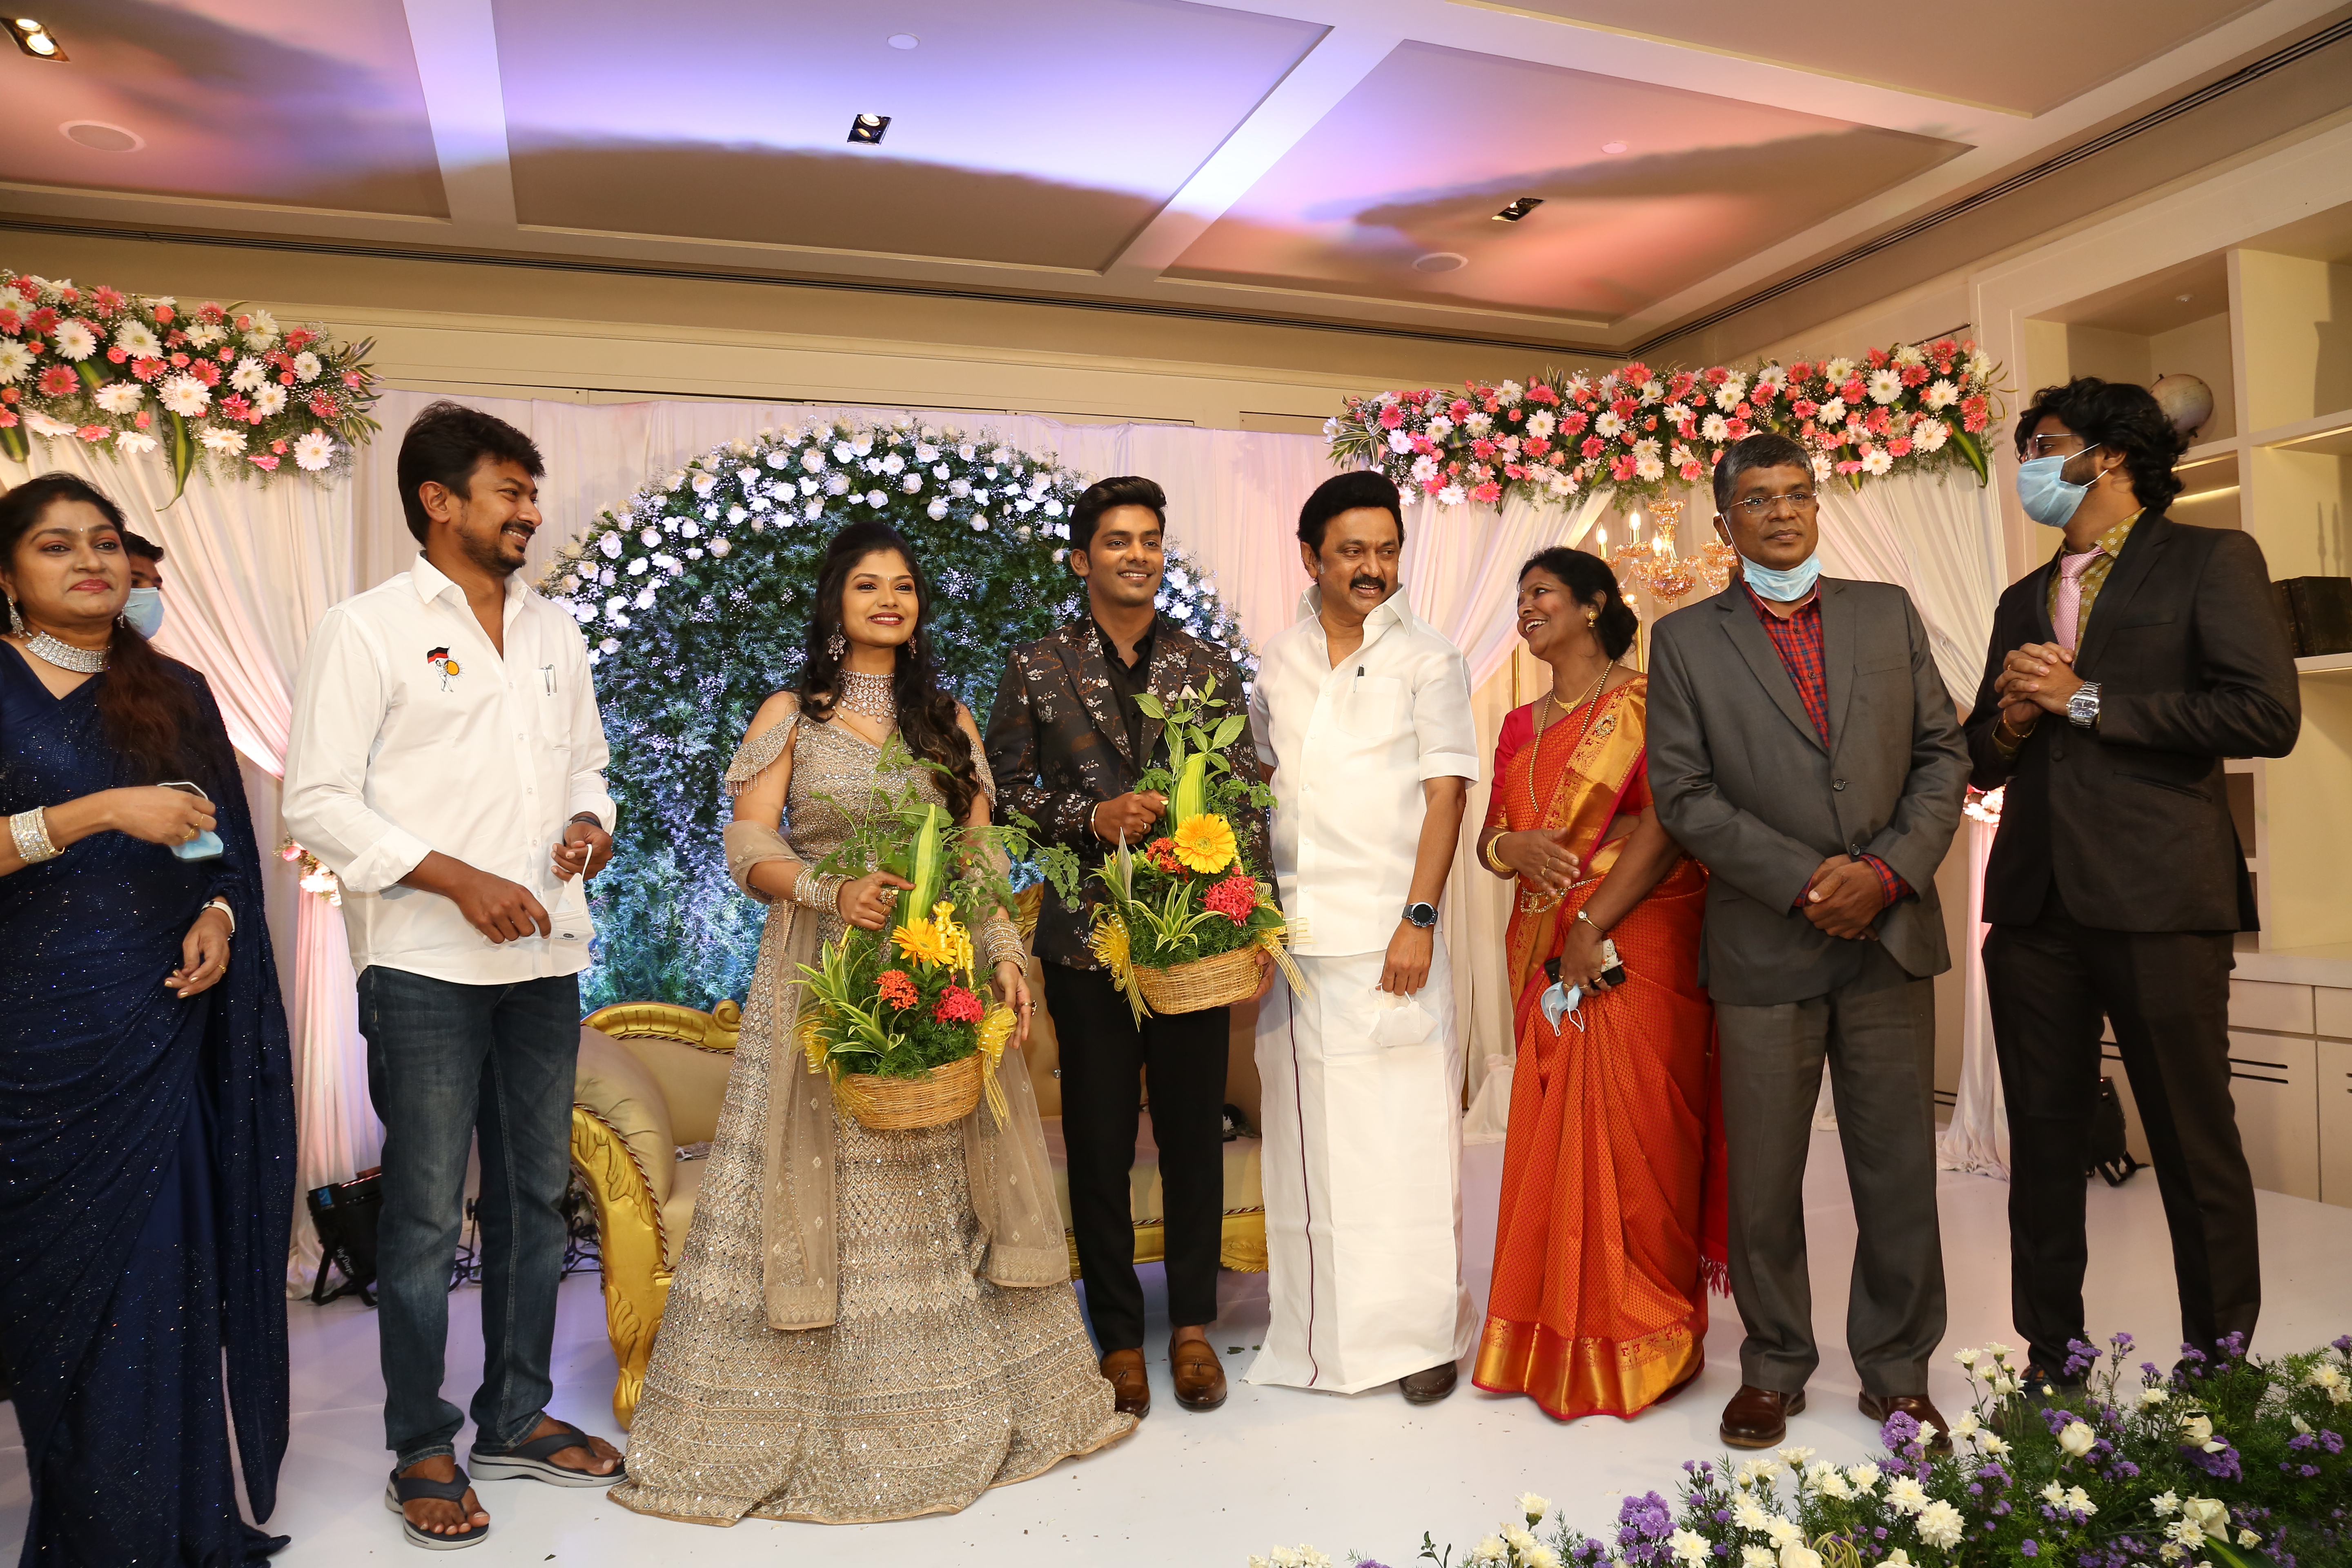 Chief Minister attended the wedding of the young music composer